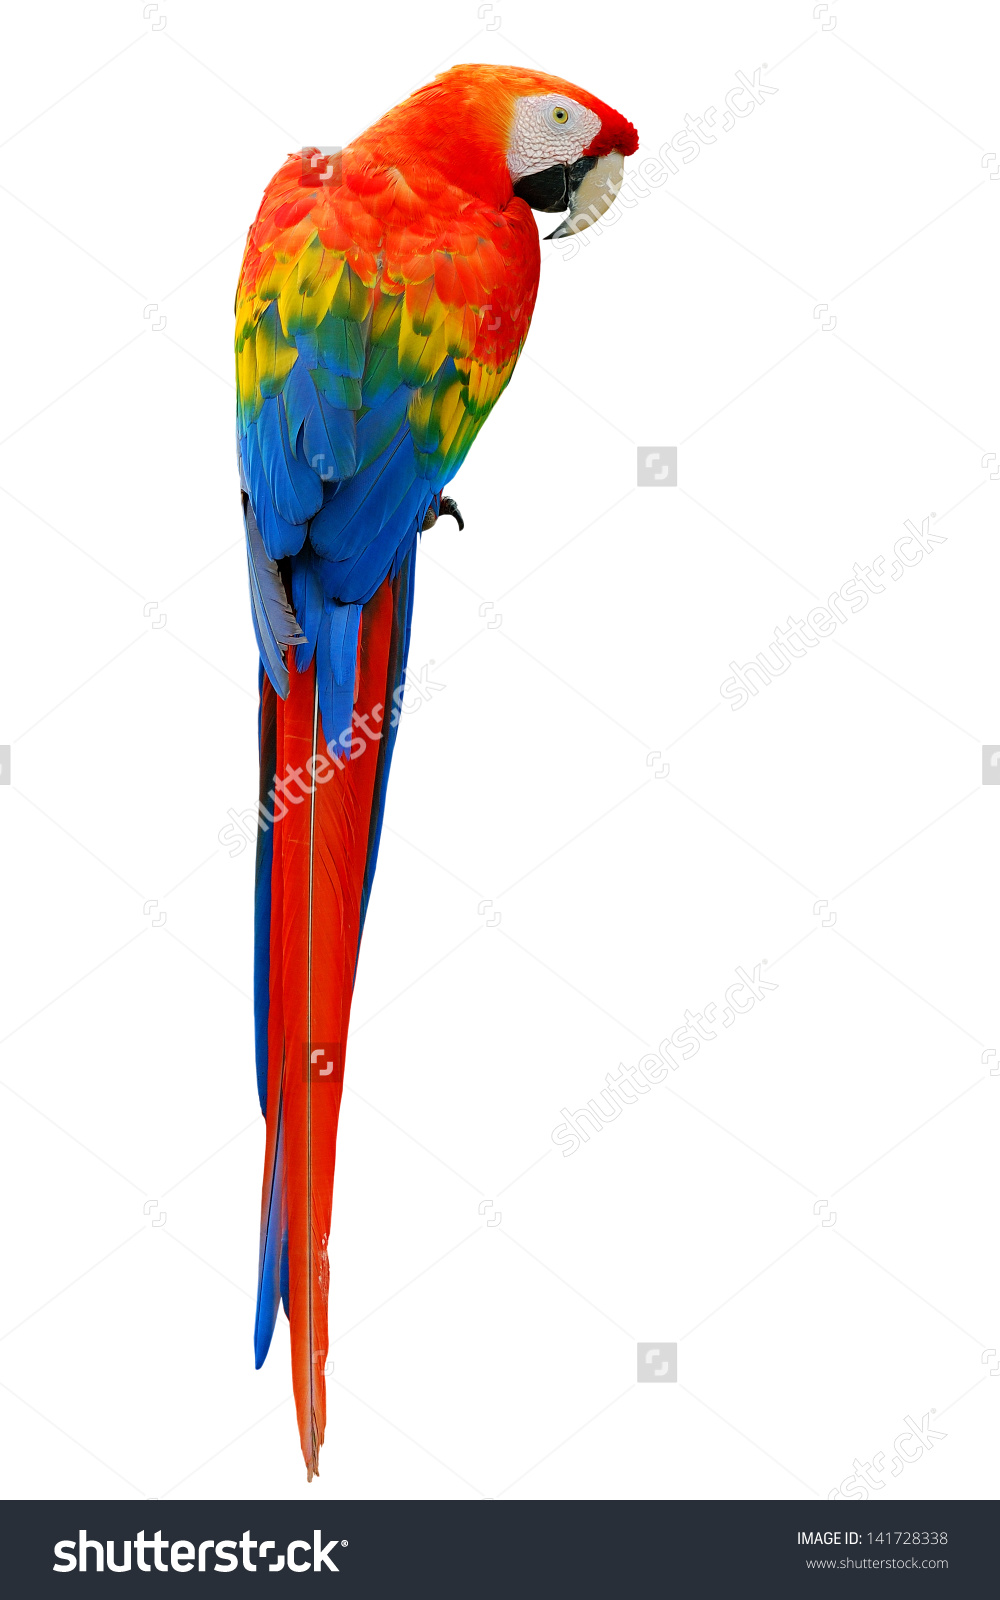 Scarlet Macaw clipart #19, Download drawings